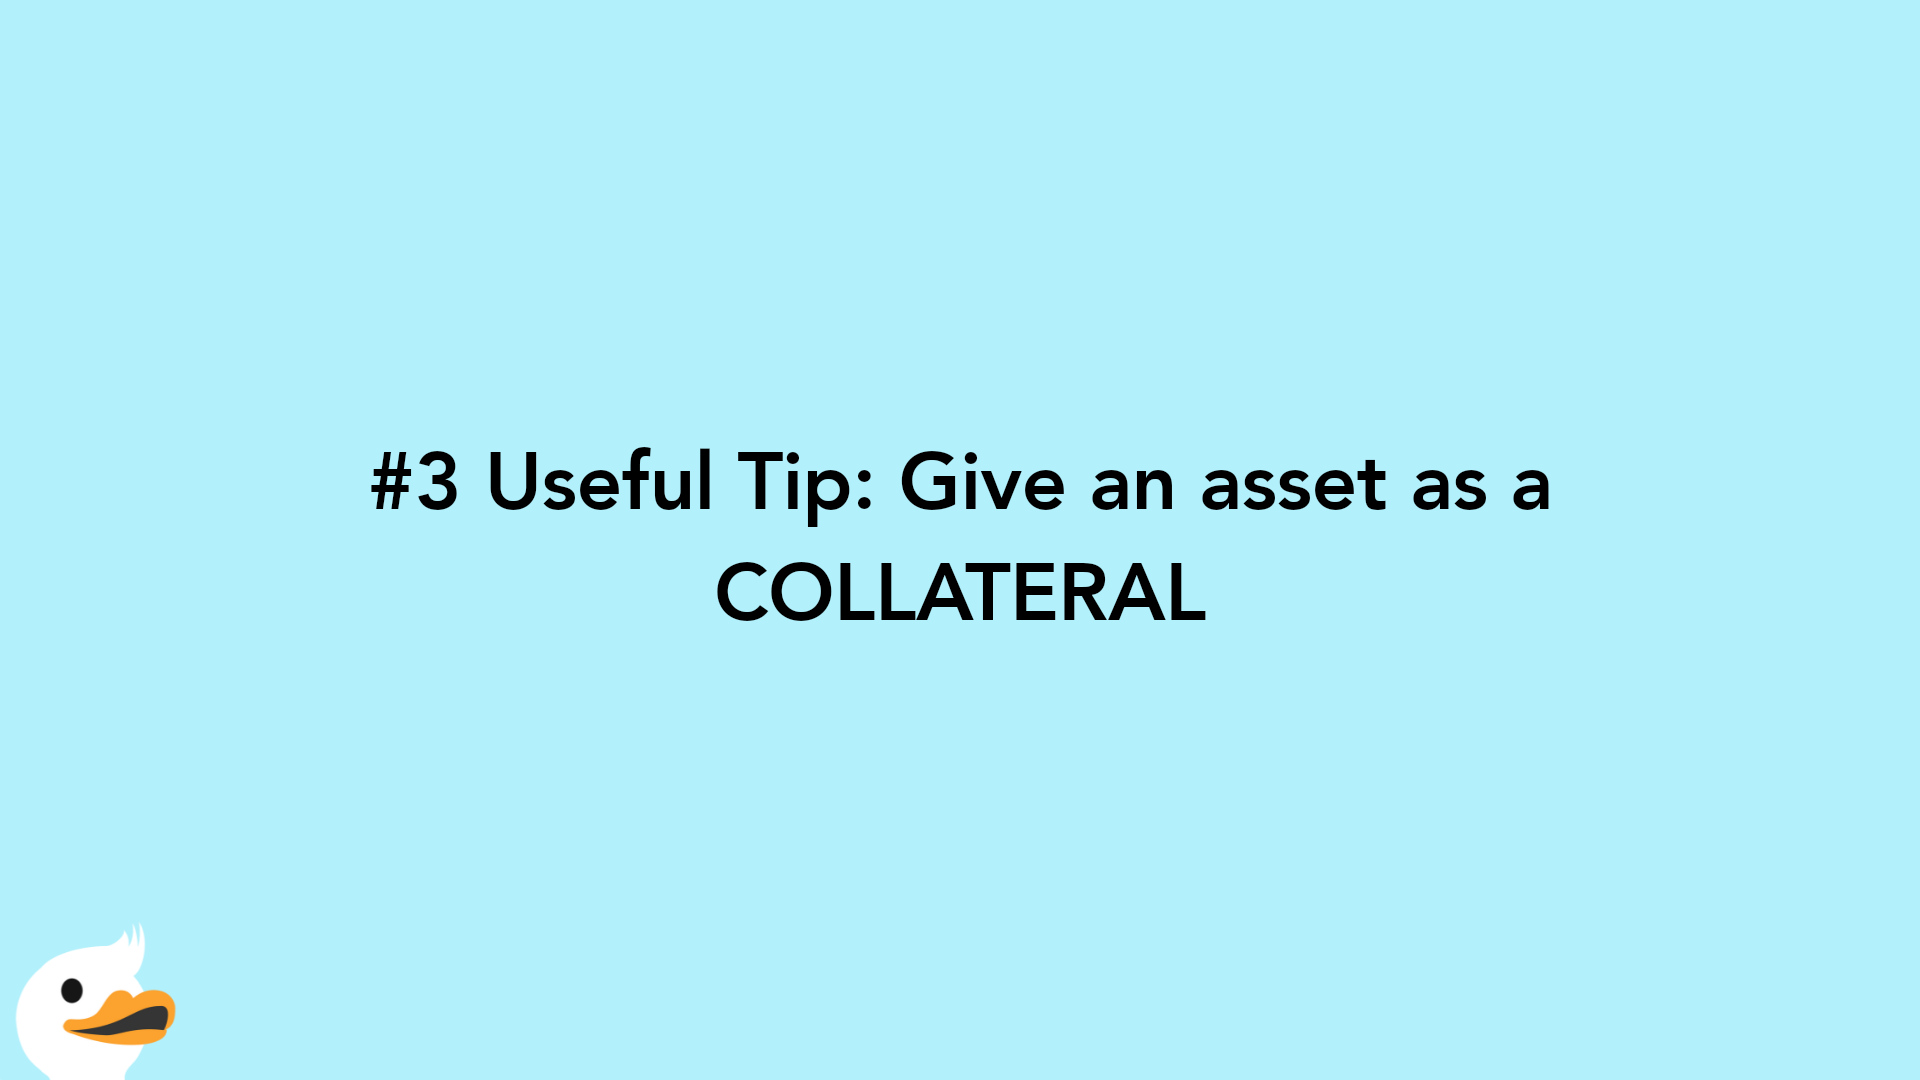 #3 Useful Tip: Give an asset as a COLLATERAL